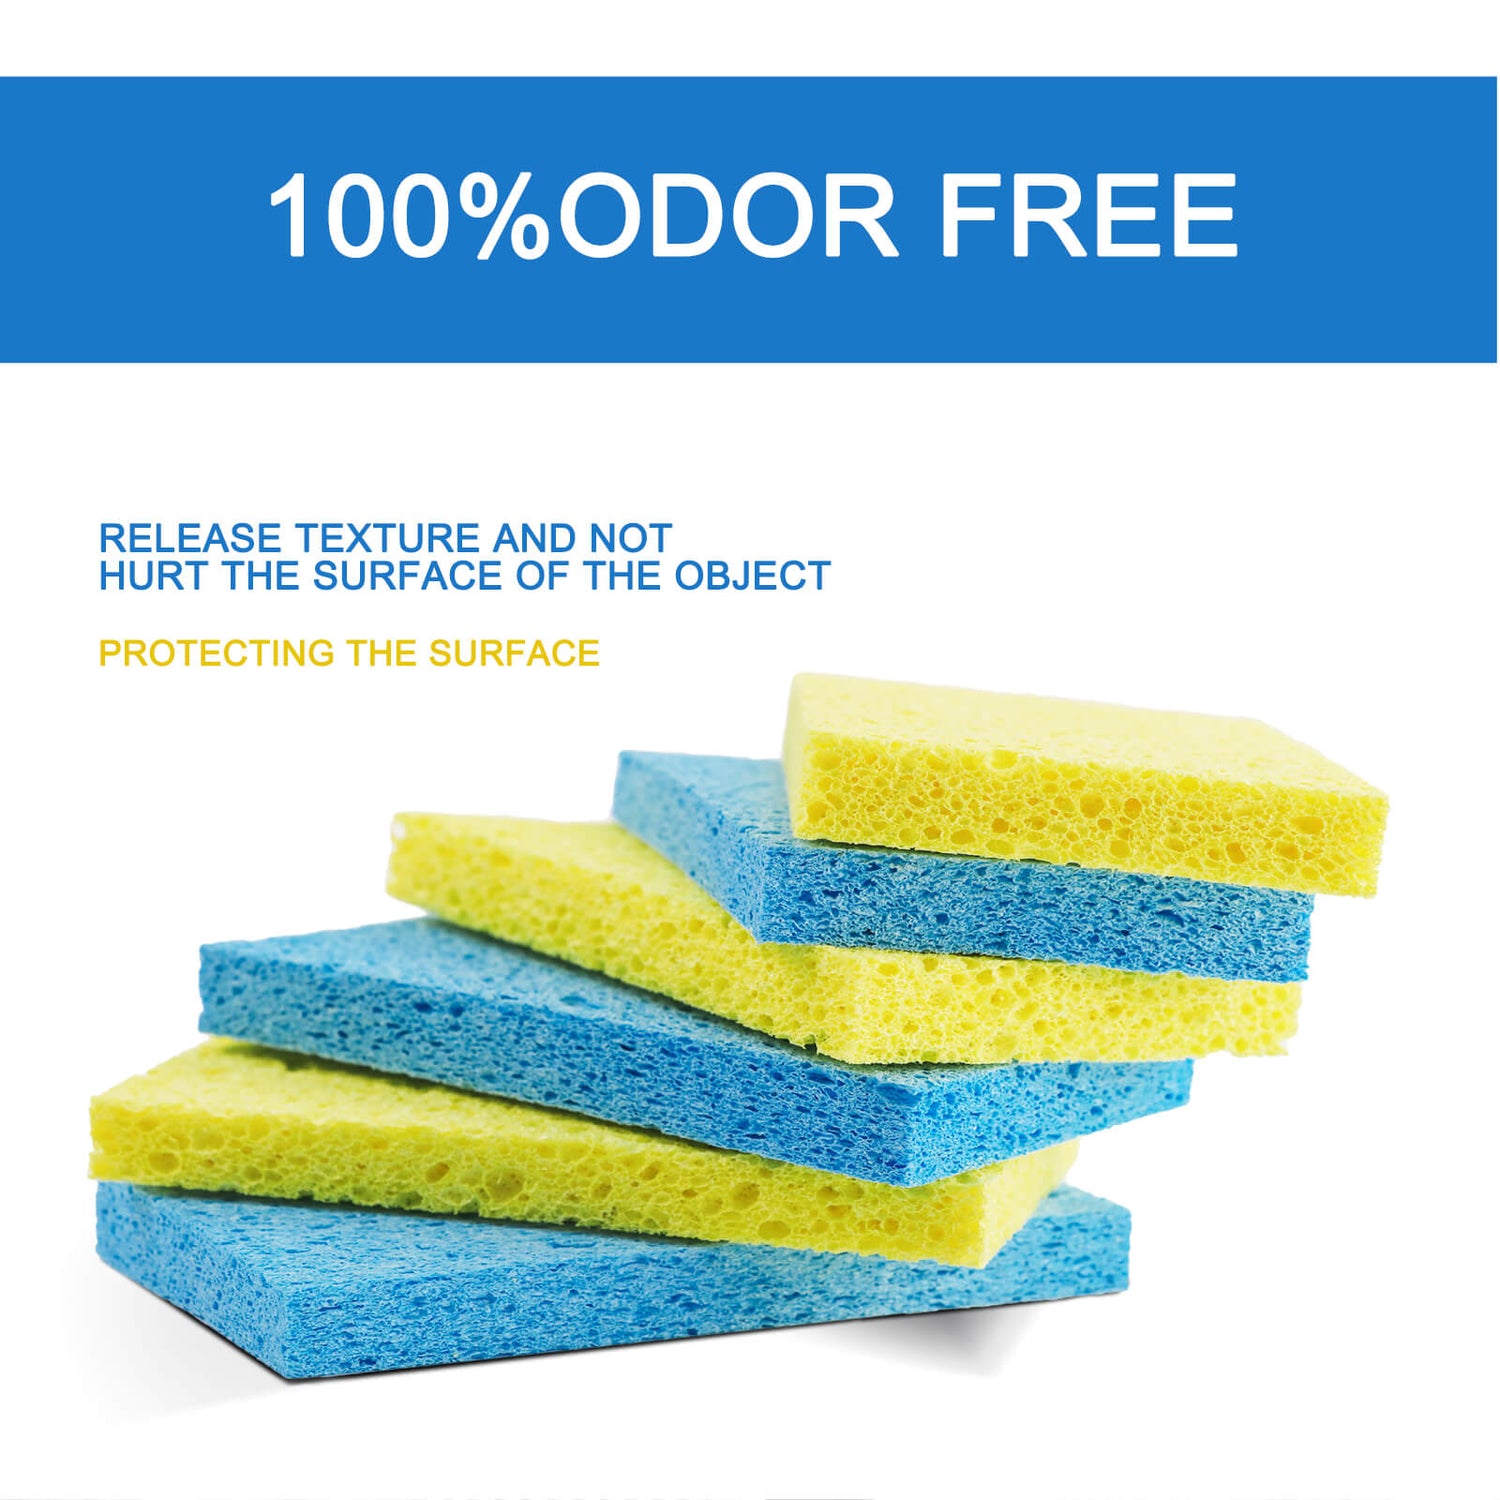 Masthome 16 Pack Cellulose Cleaning Scrub Sponges